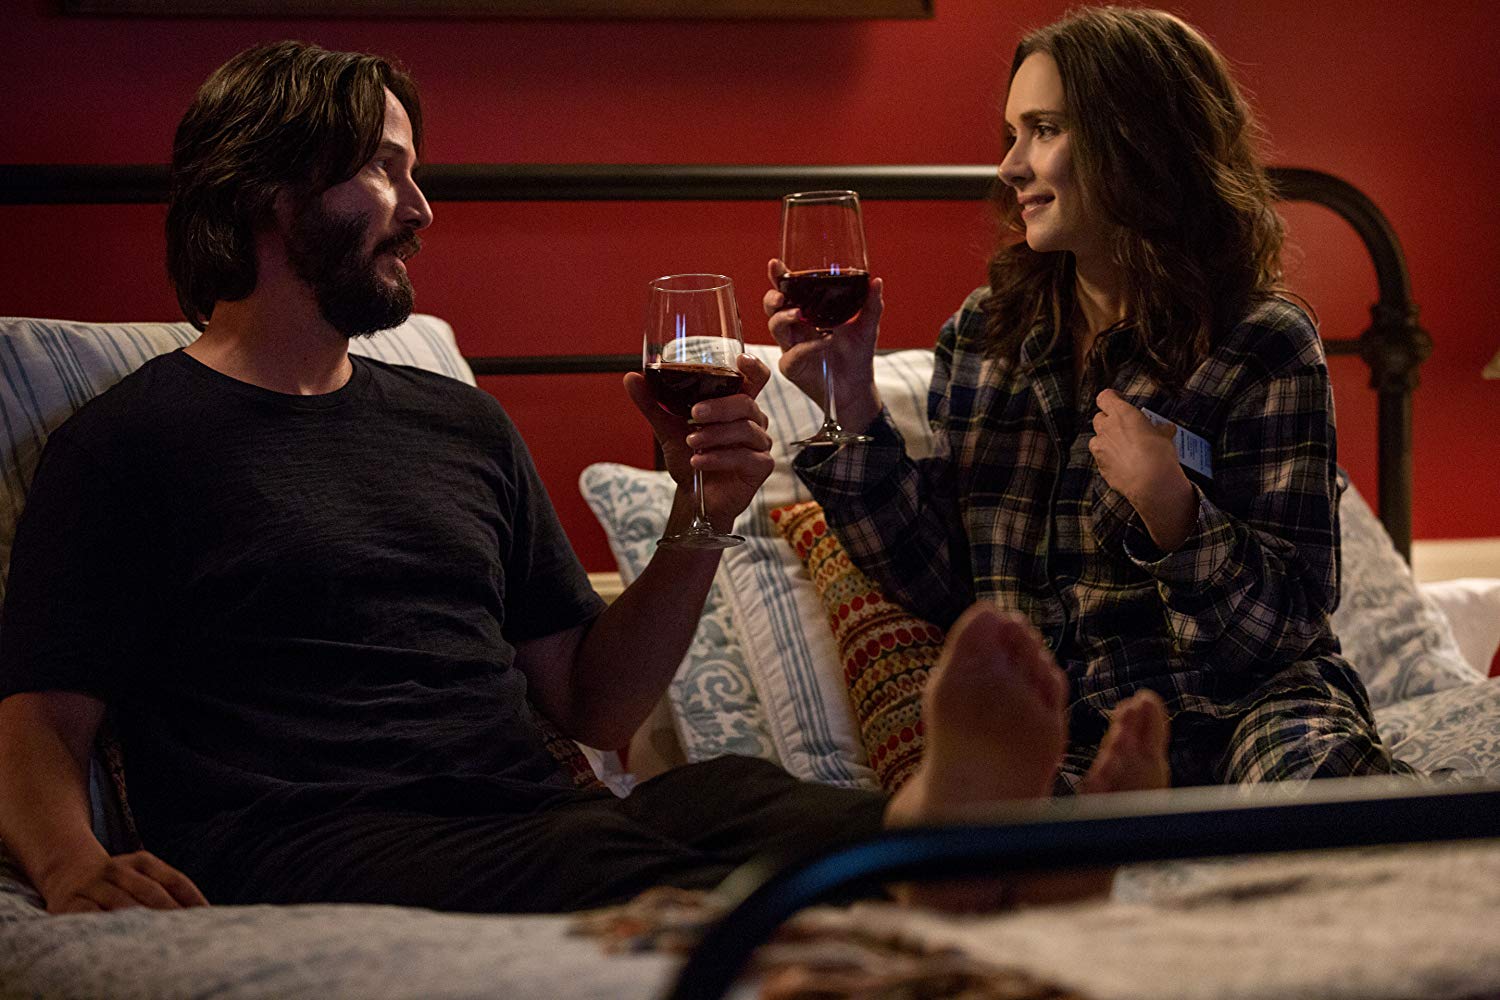   Destination Wedding (Victor Levin, 2018)  This had to be added on my list. It’s Keanu Reeves AND Winona Ryder together in a film again. Great verbal jabs between the two of them. When it’s funny, it’s hilarious, but when it’s not, it’s slightly gra